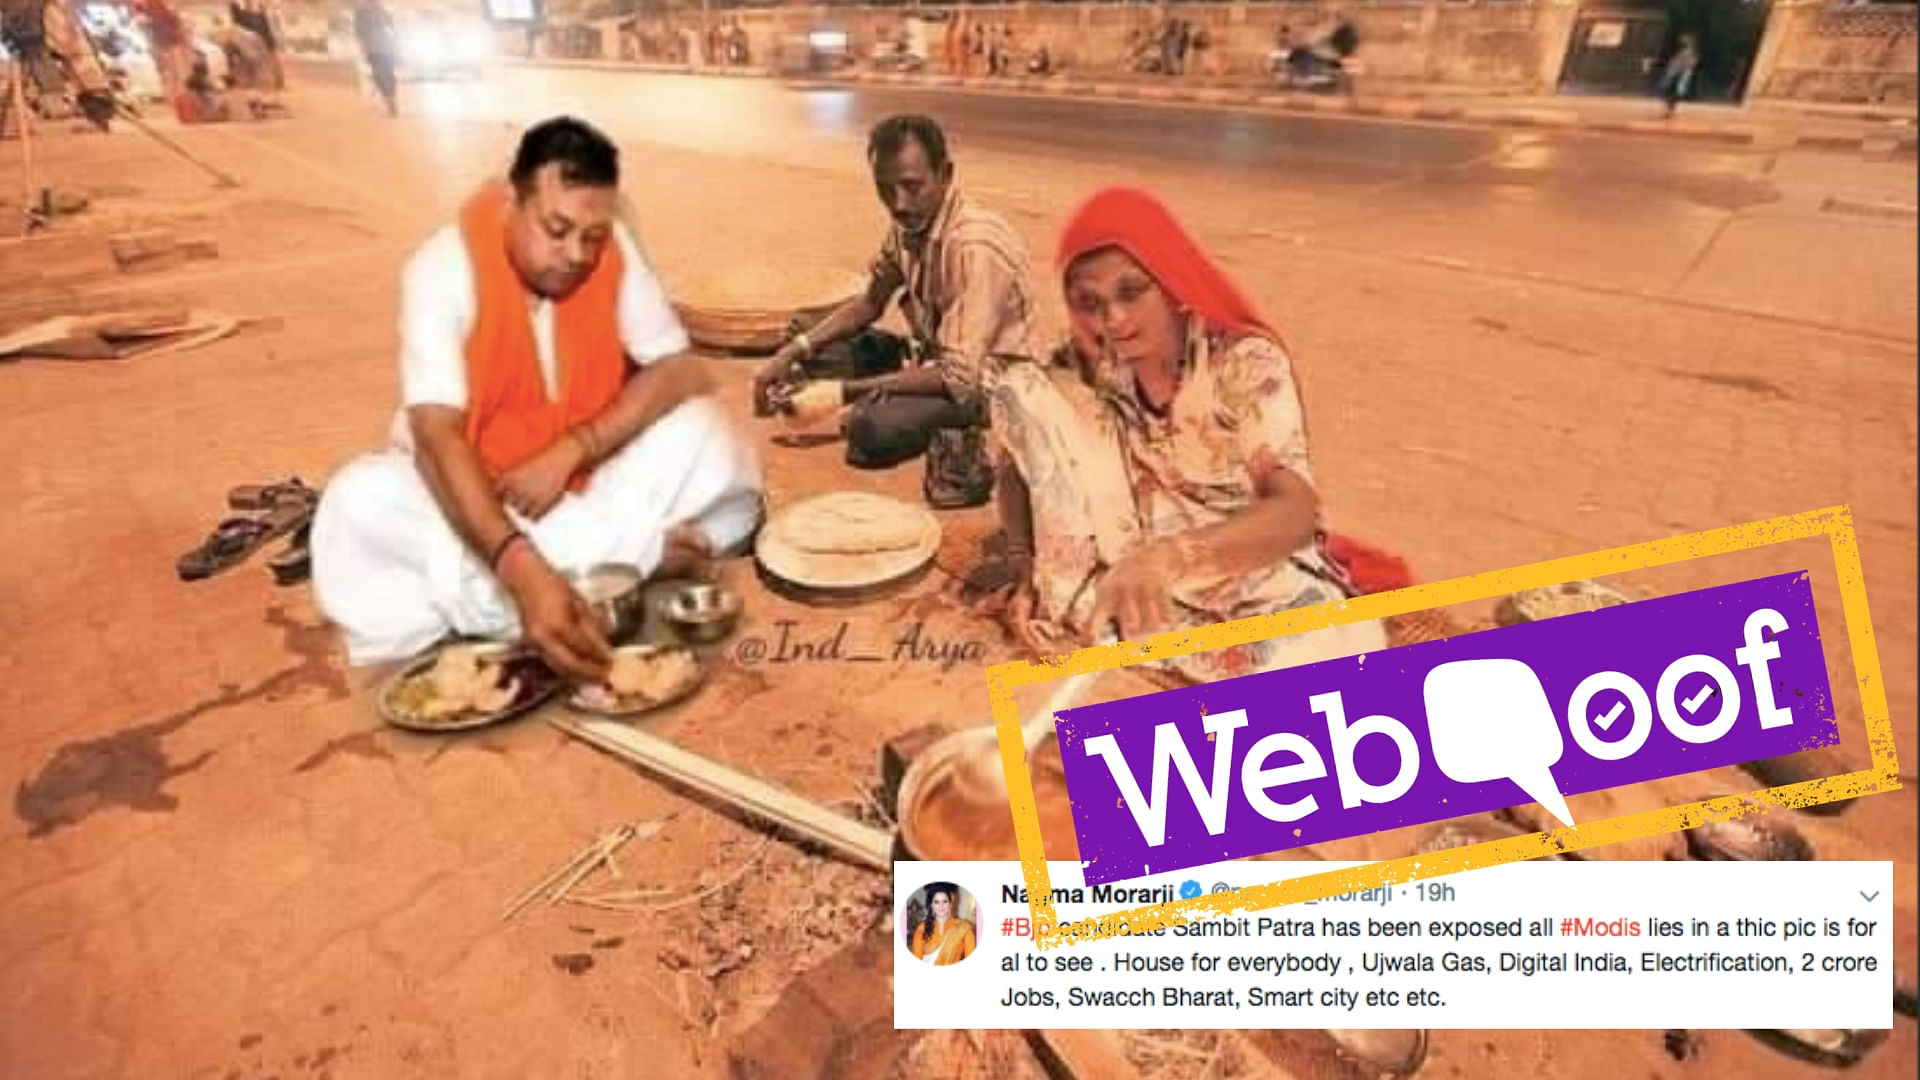 A photo of Sambit Patra eating on a pavement with a homeless couple has gone viral. 